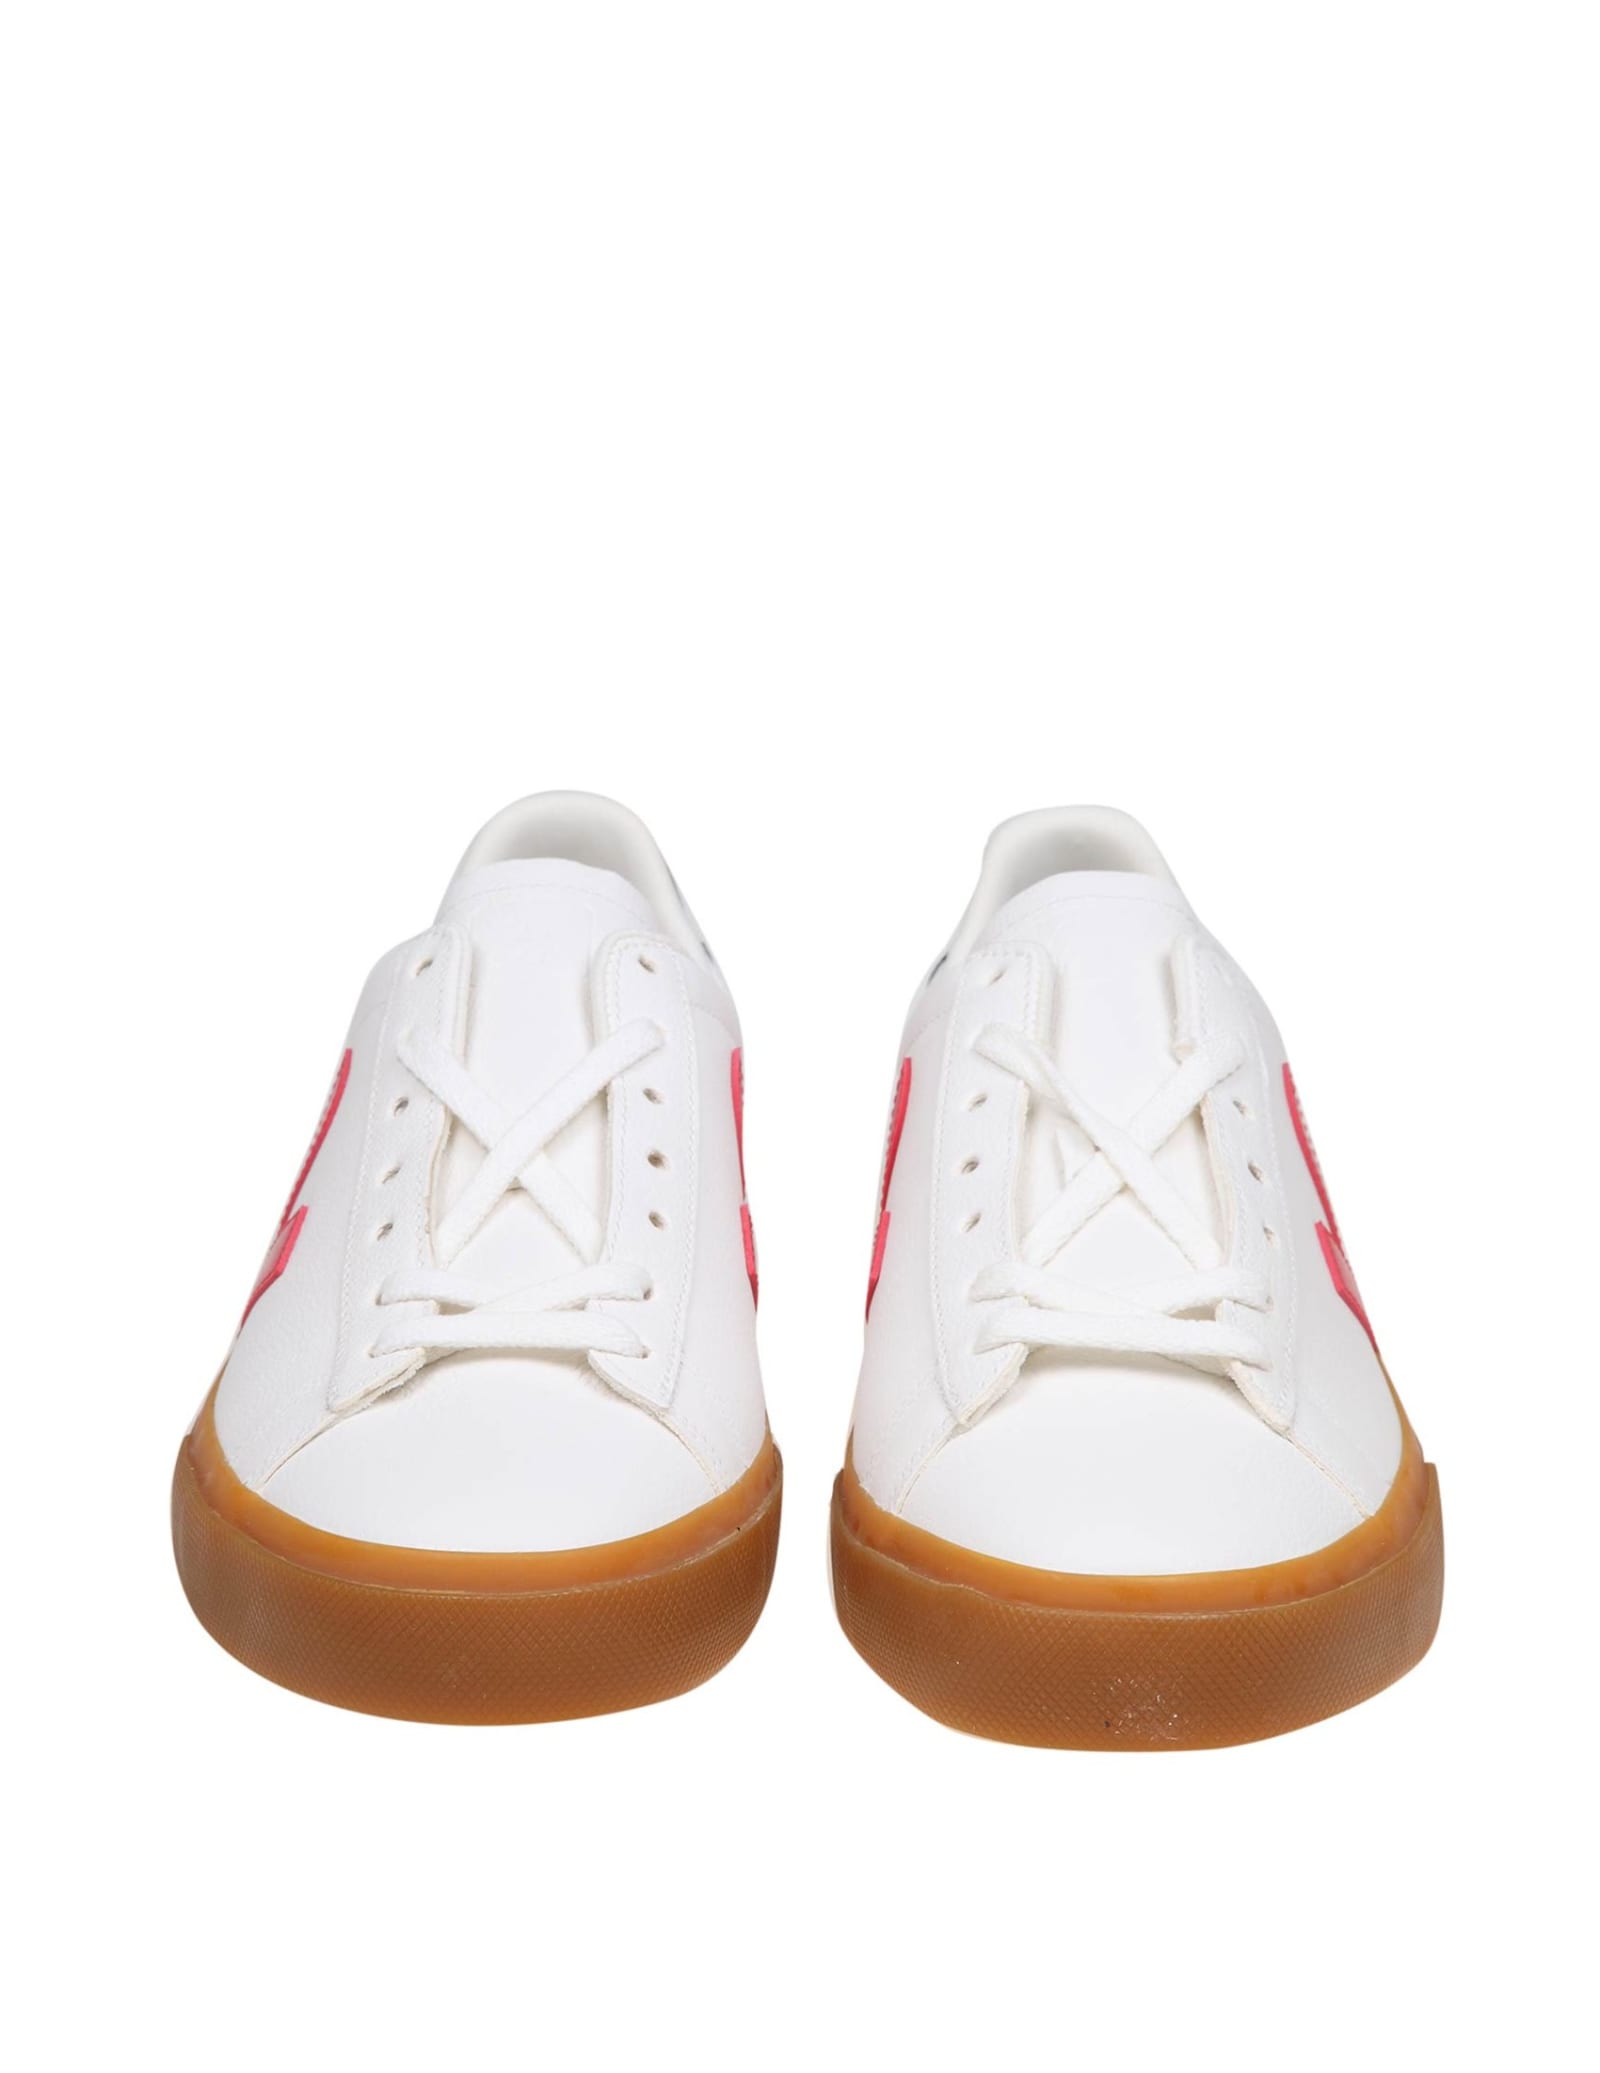 Shop Veja Campo Chromefree In White/red And Green Leather In White/poker